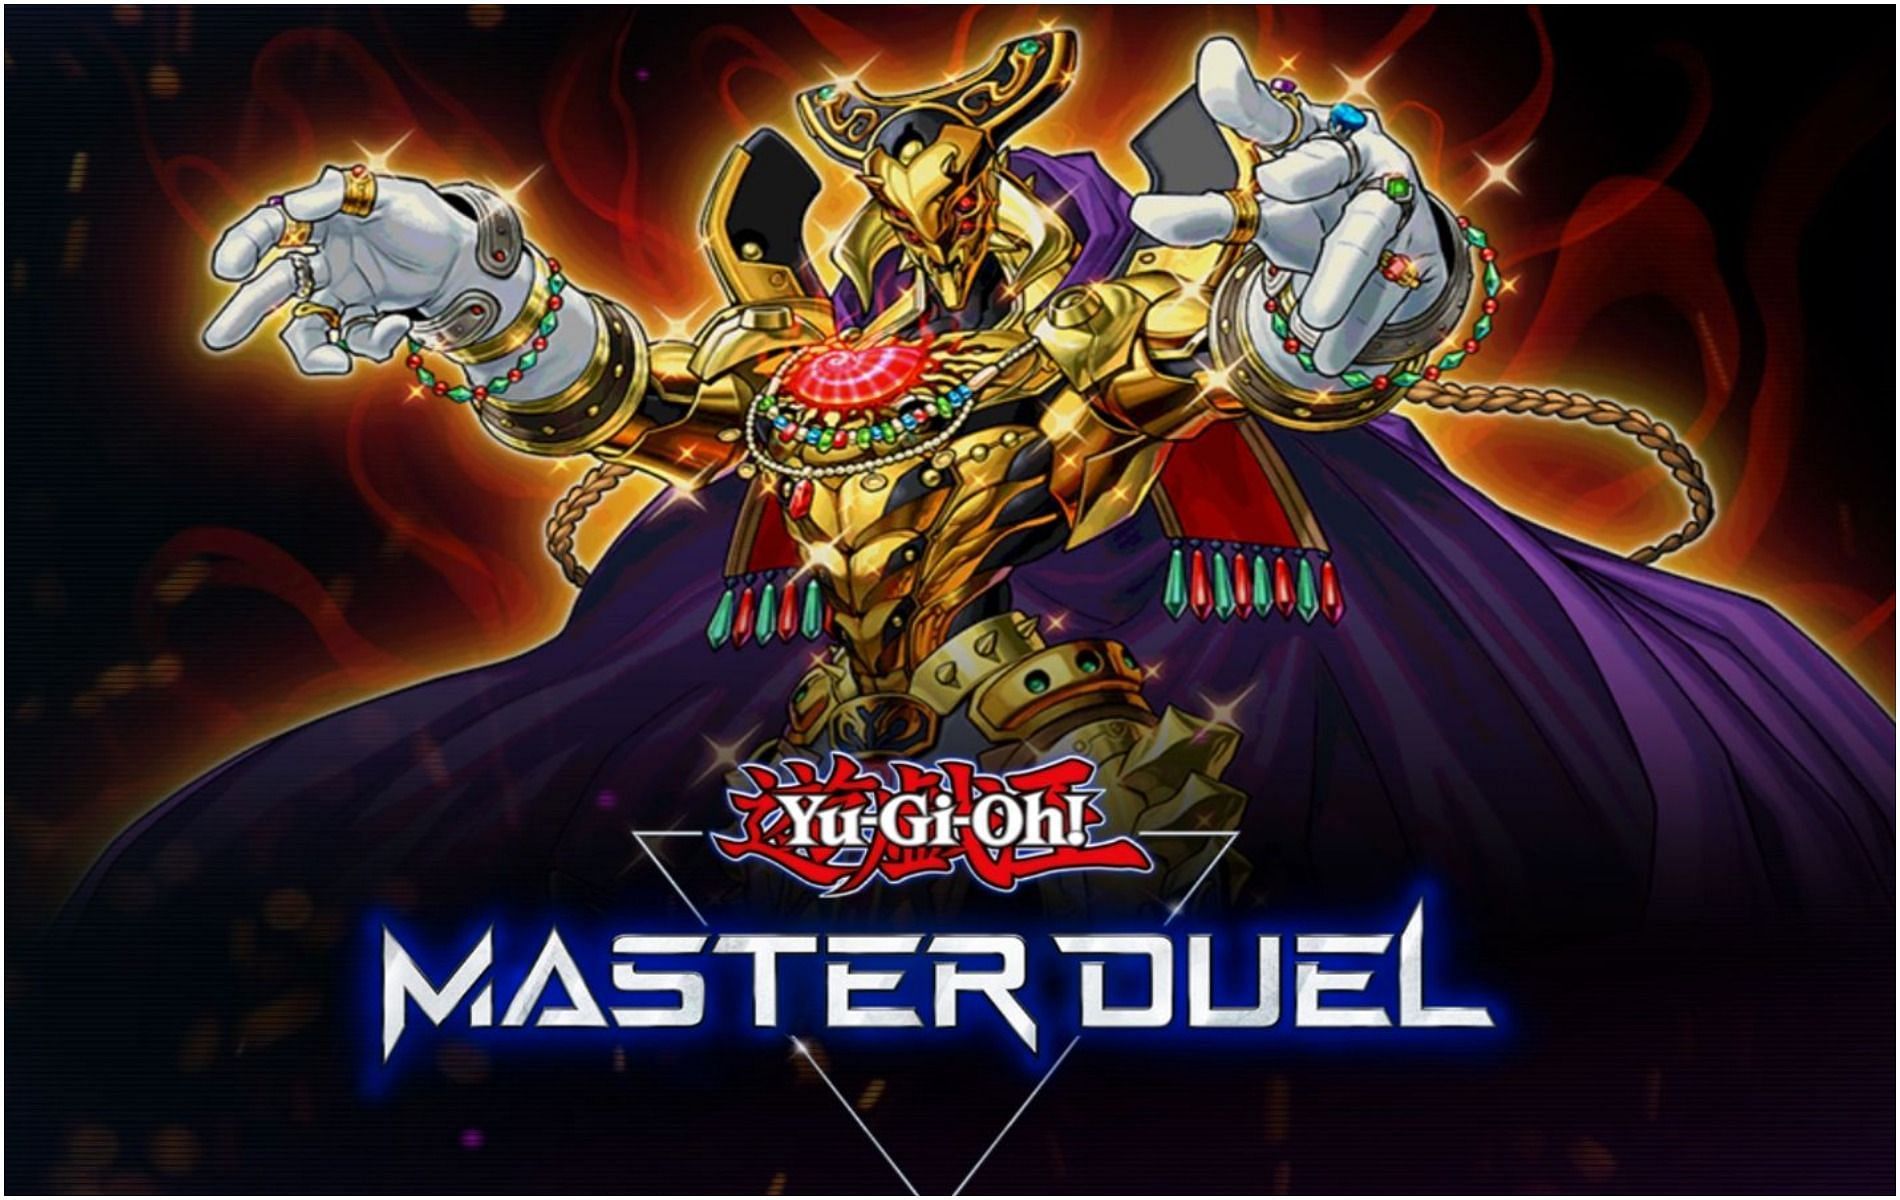 Yu-Gi-Oh! Master Duel features a wealth of powerful trap cards, but which are the best? (Image via Konami)